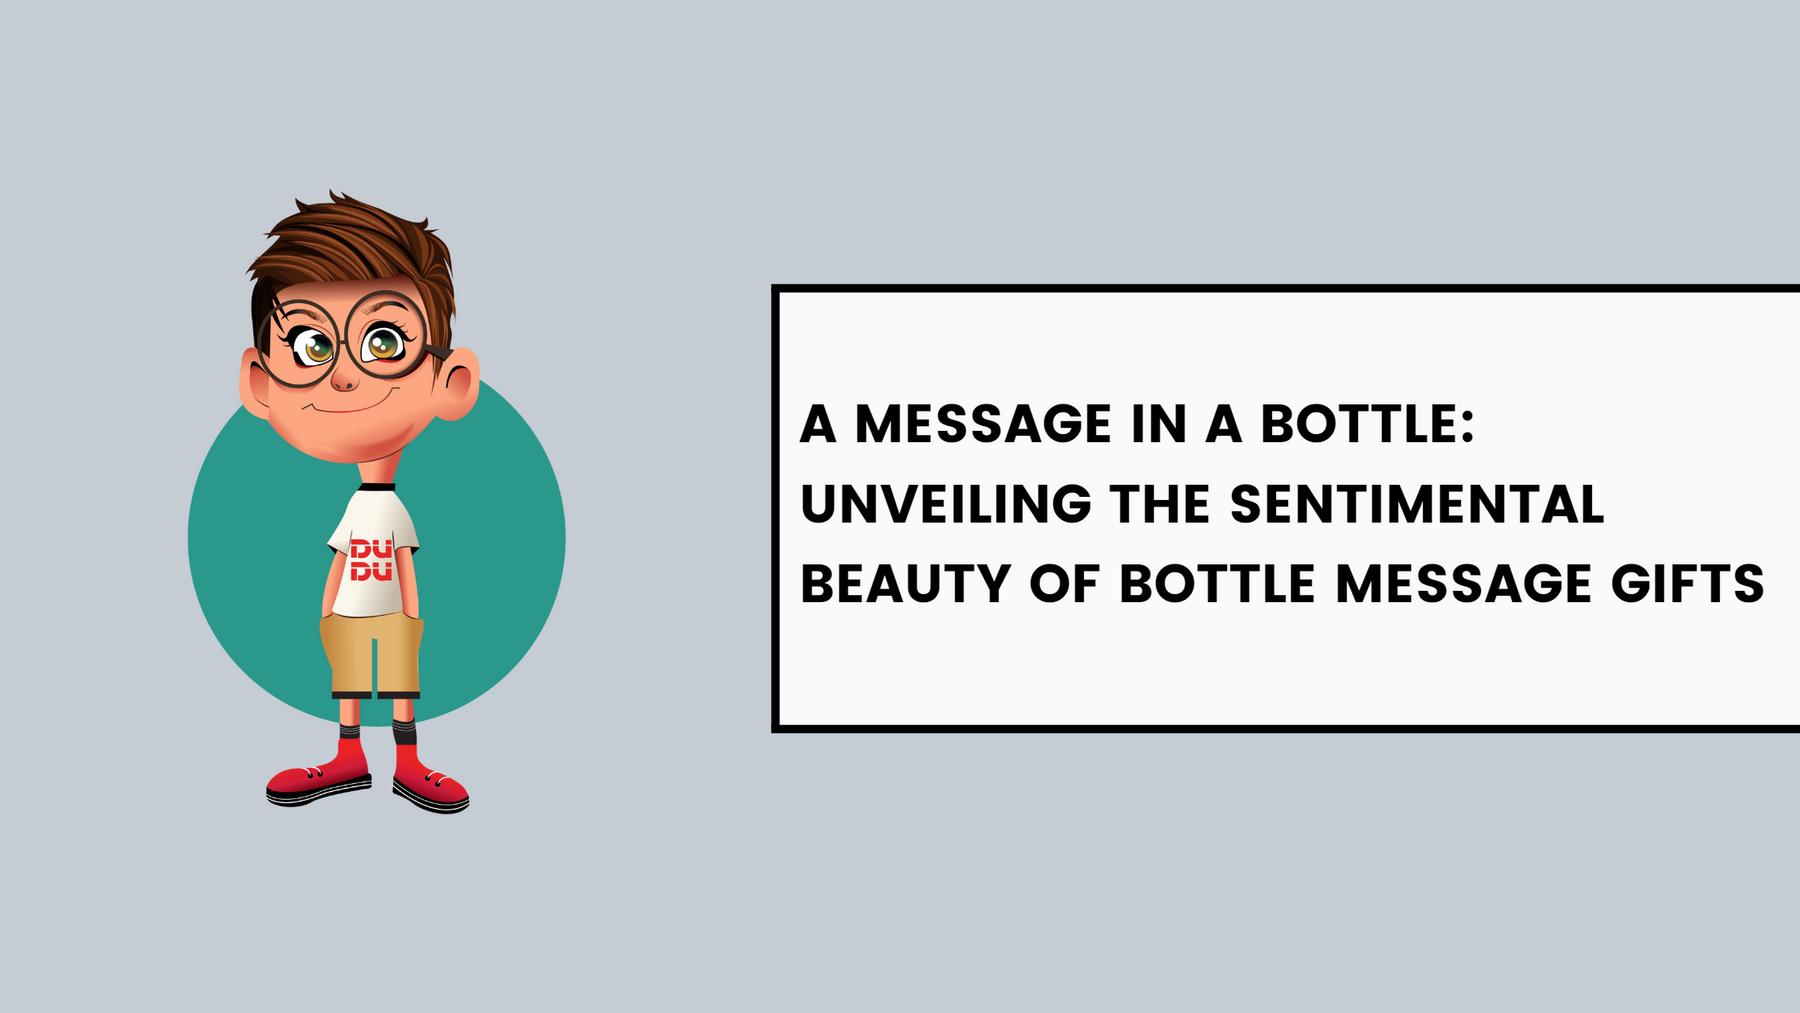 A Message in a Bottle: Unveiling the Sentimental Beauty of Bottle Message Gifts